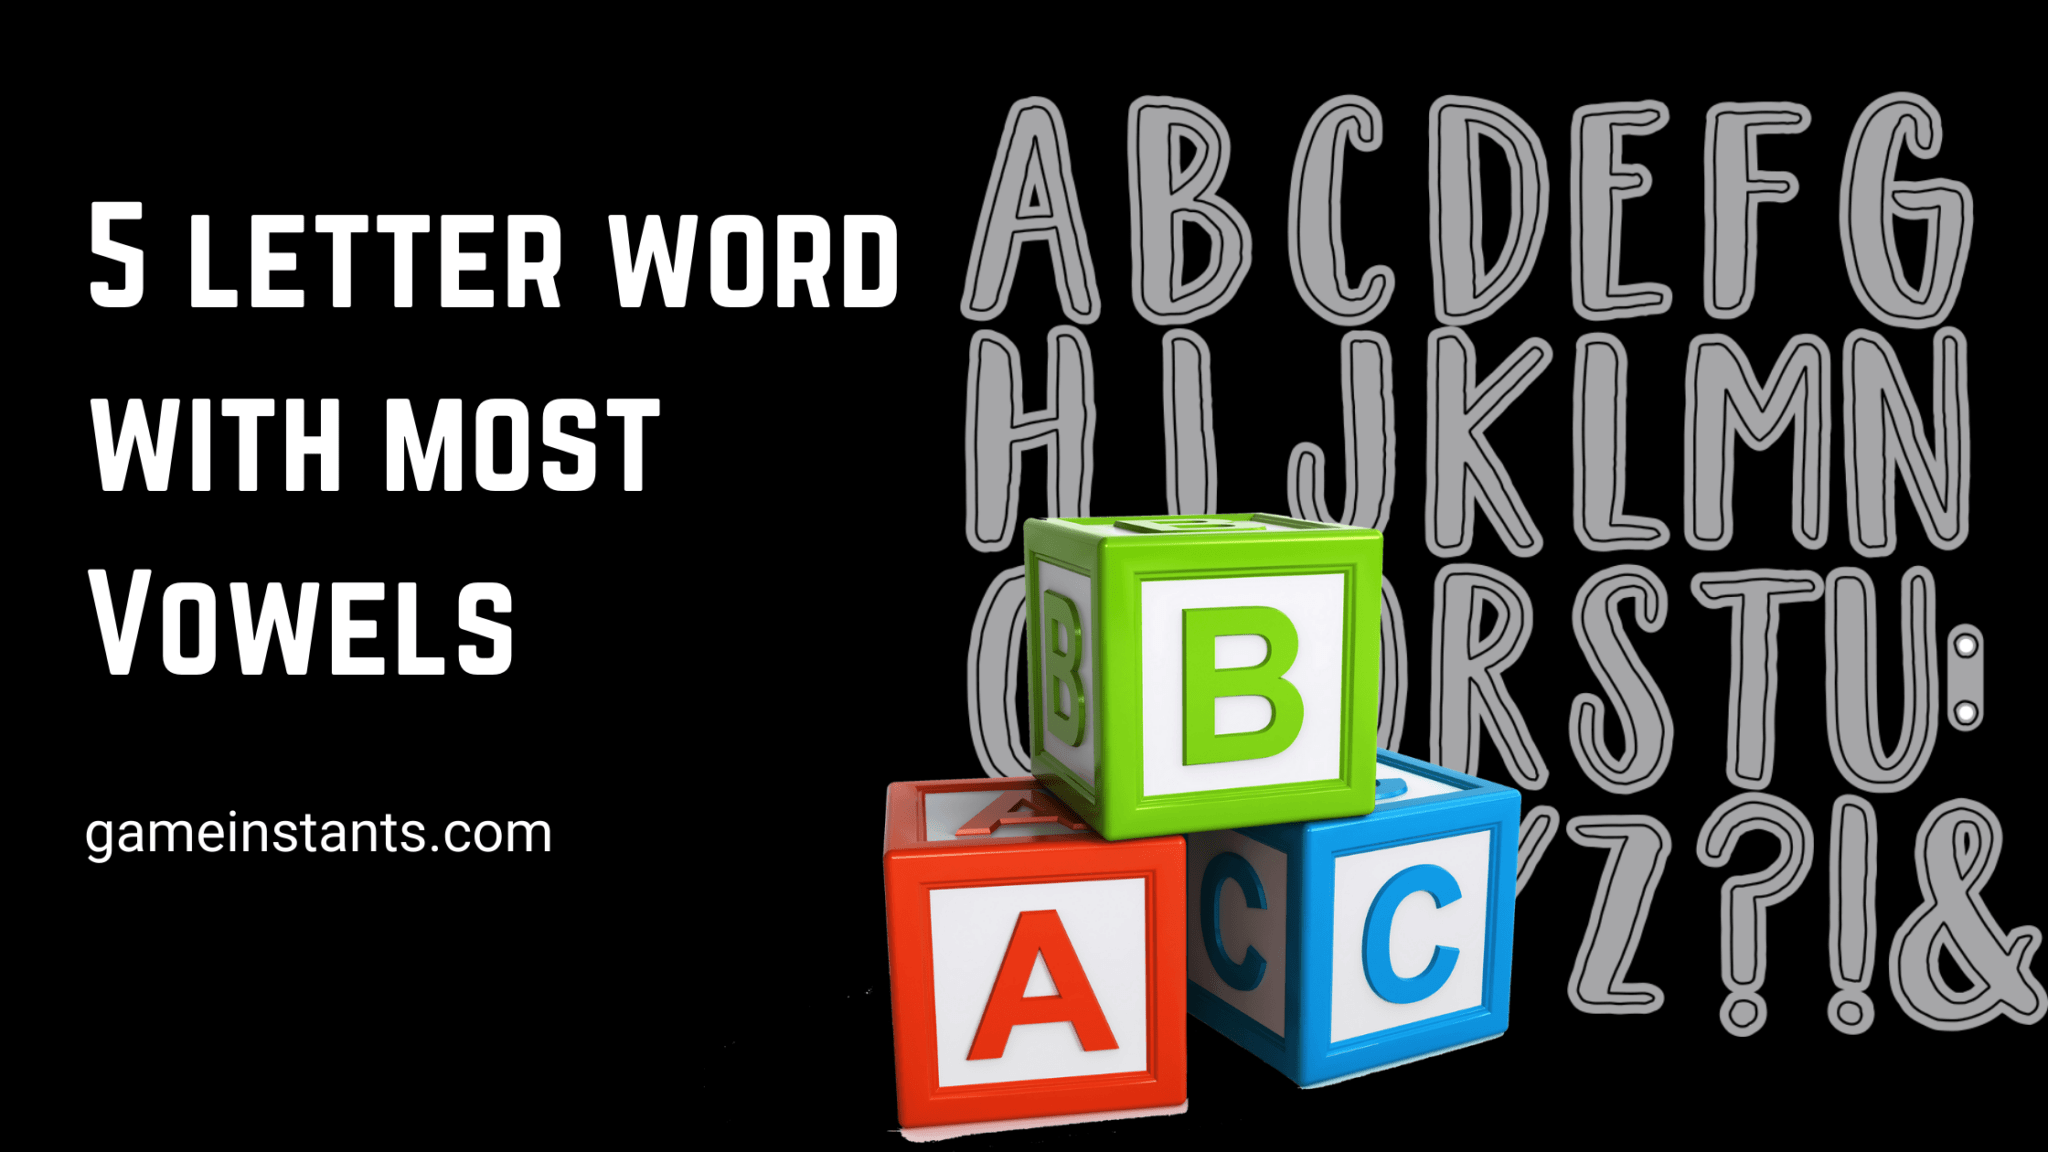 5 Letter Word With Most Vowels (3, 4 Vowels Words) - Gameinstants